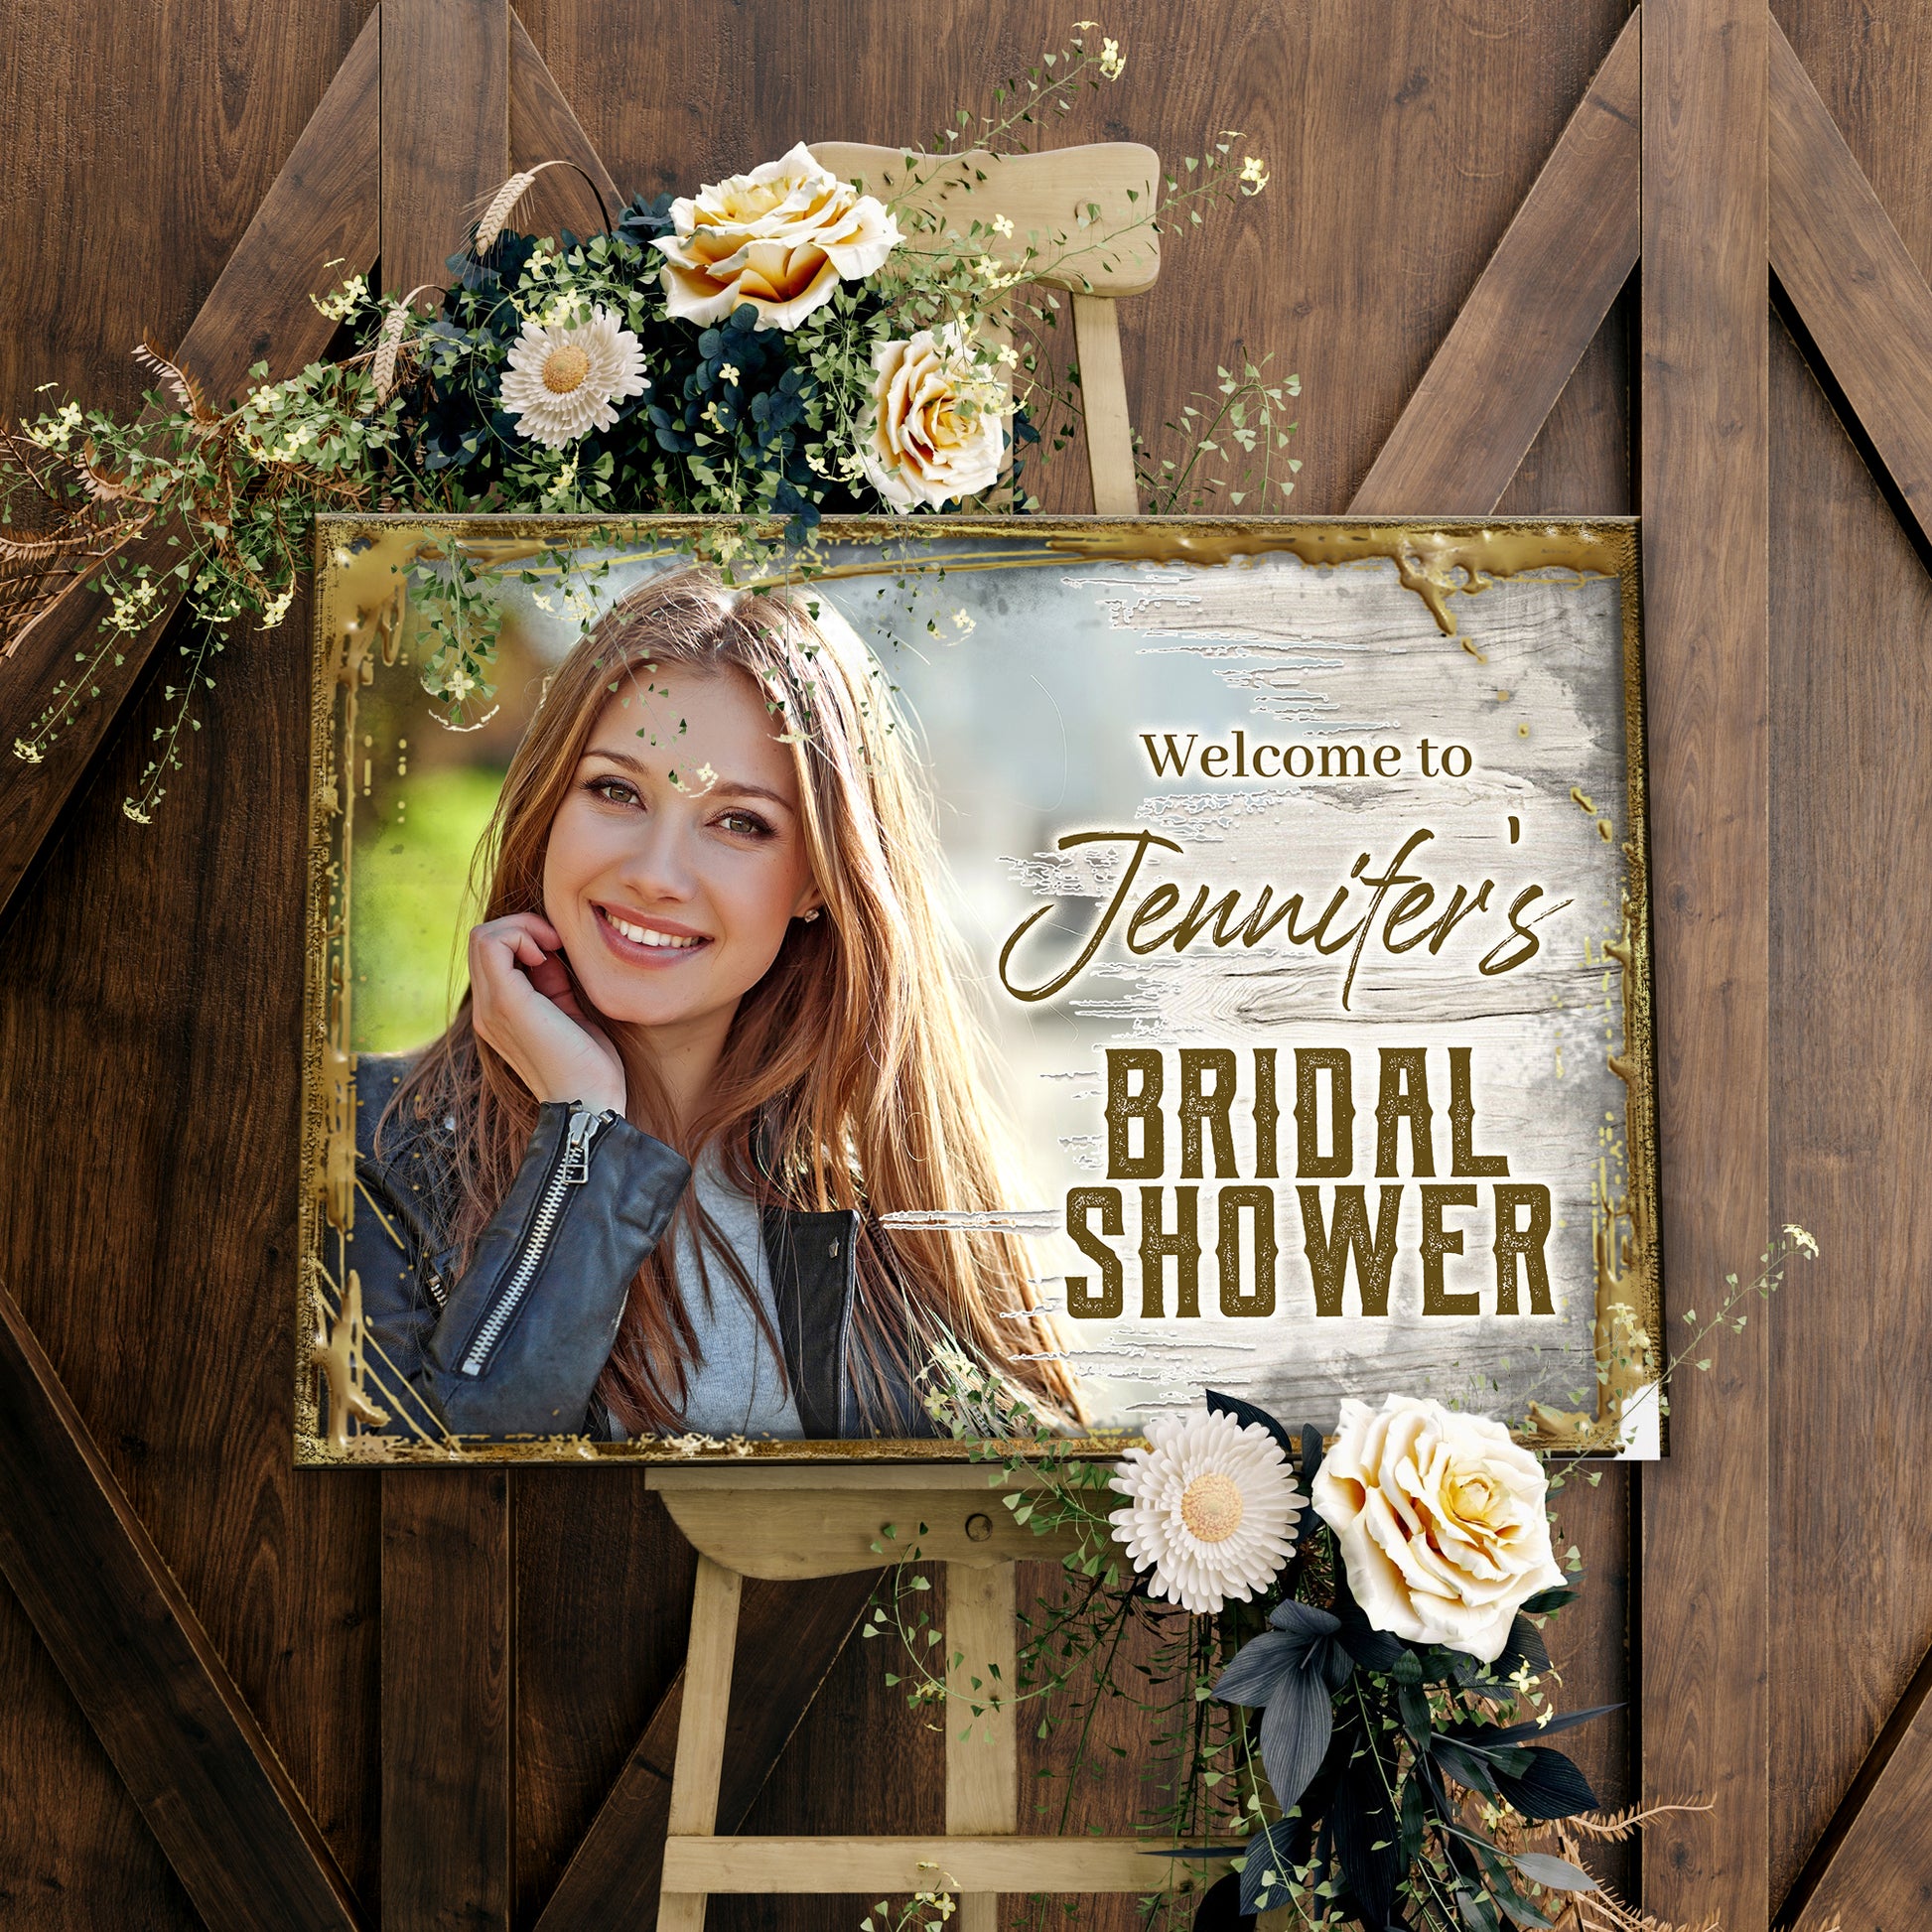 Welcome To The Bridal Shower Sign  - Image by Tailored Canvases